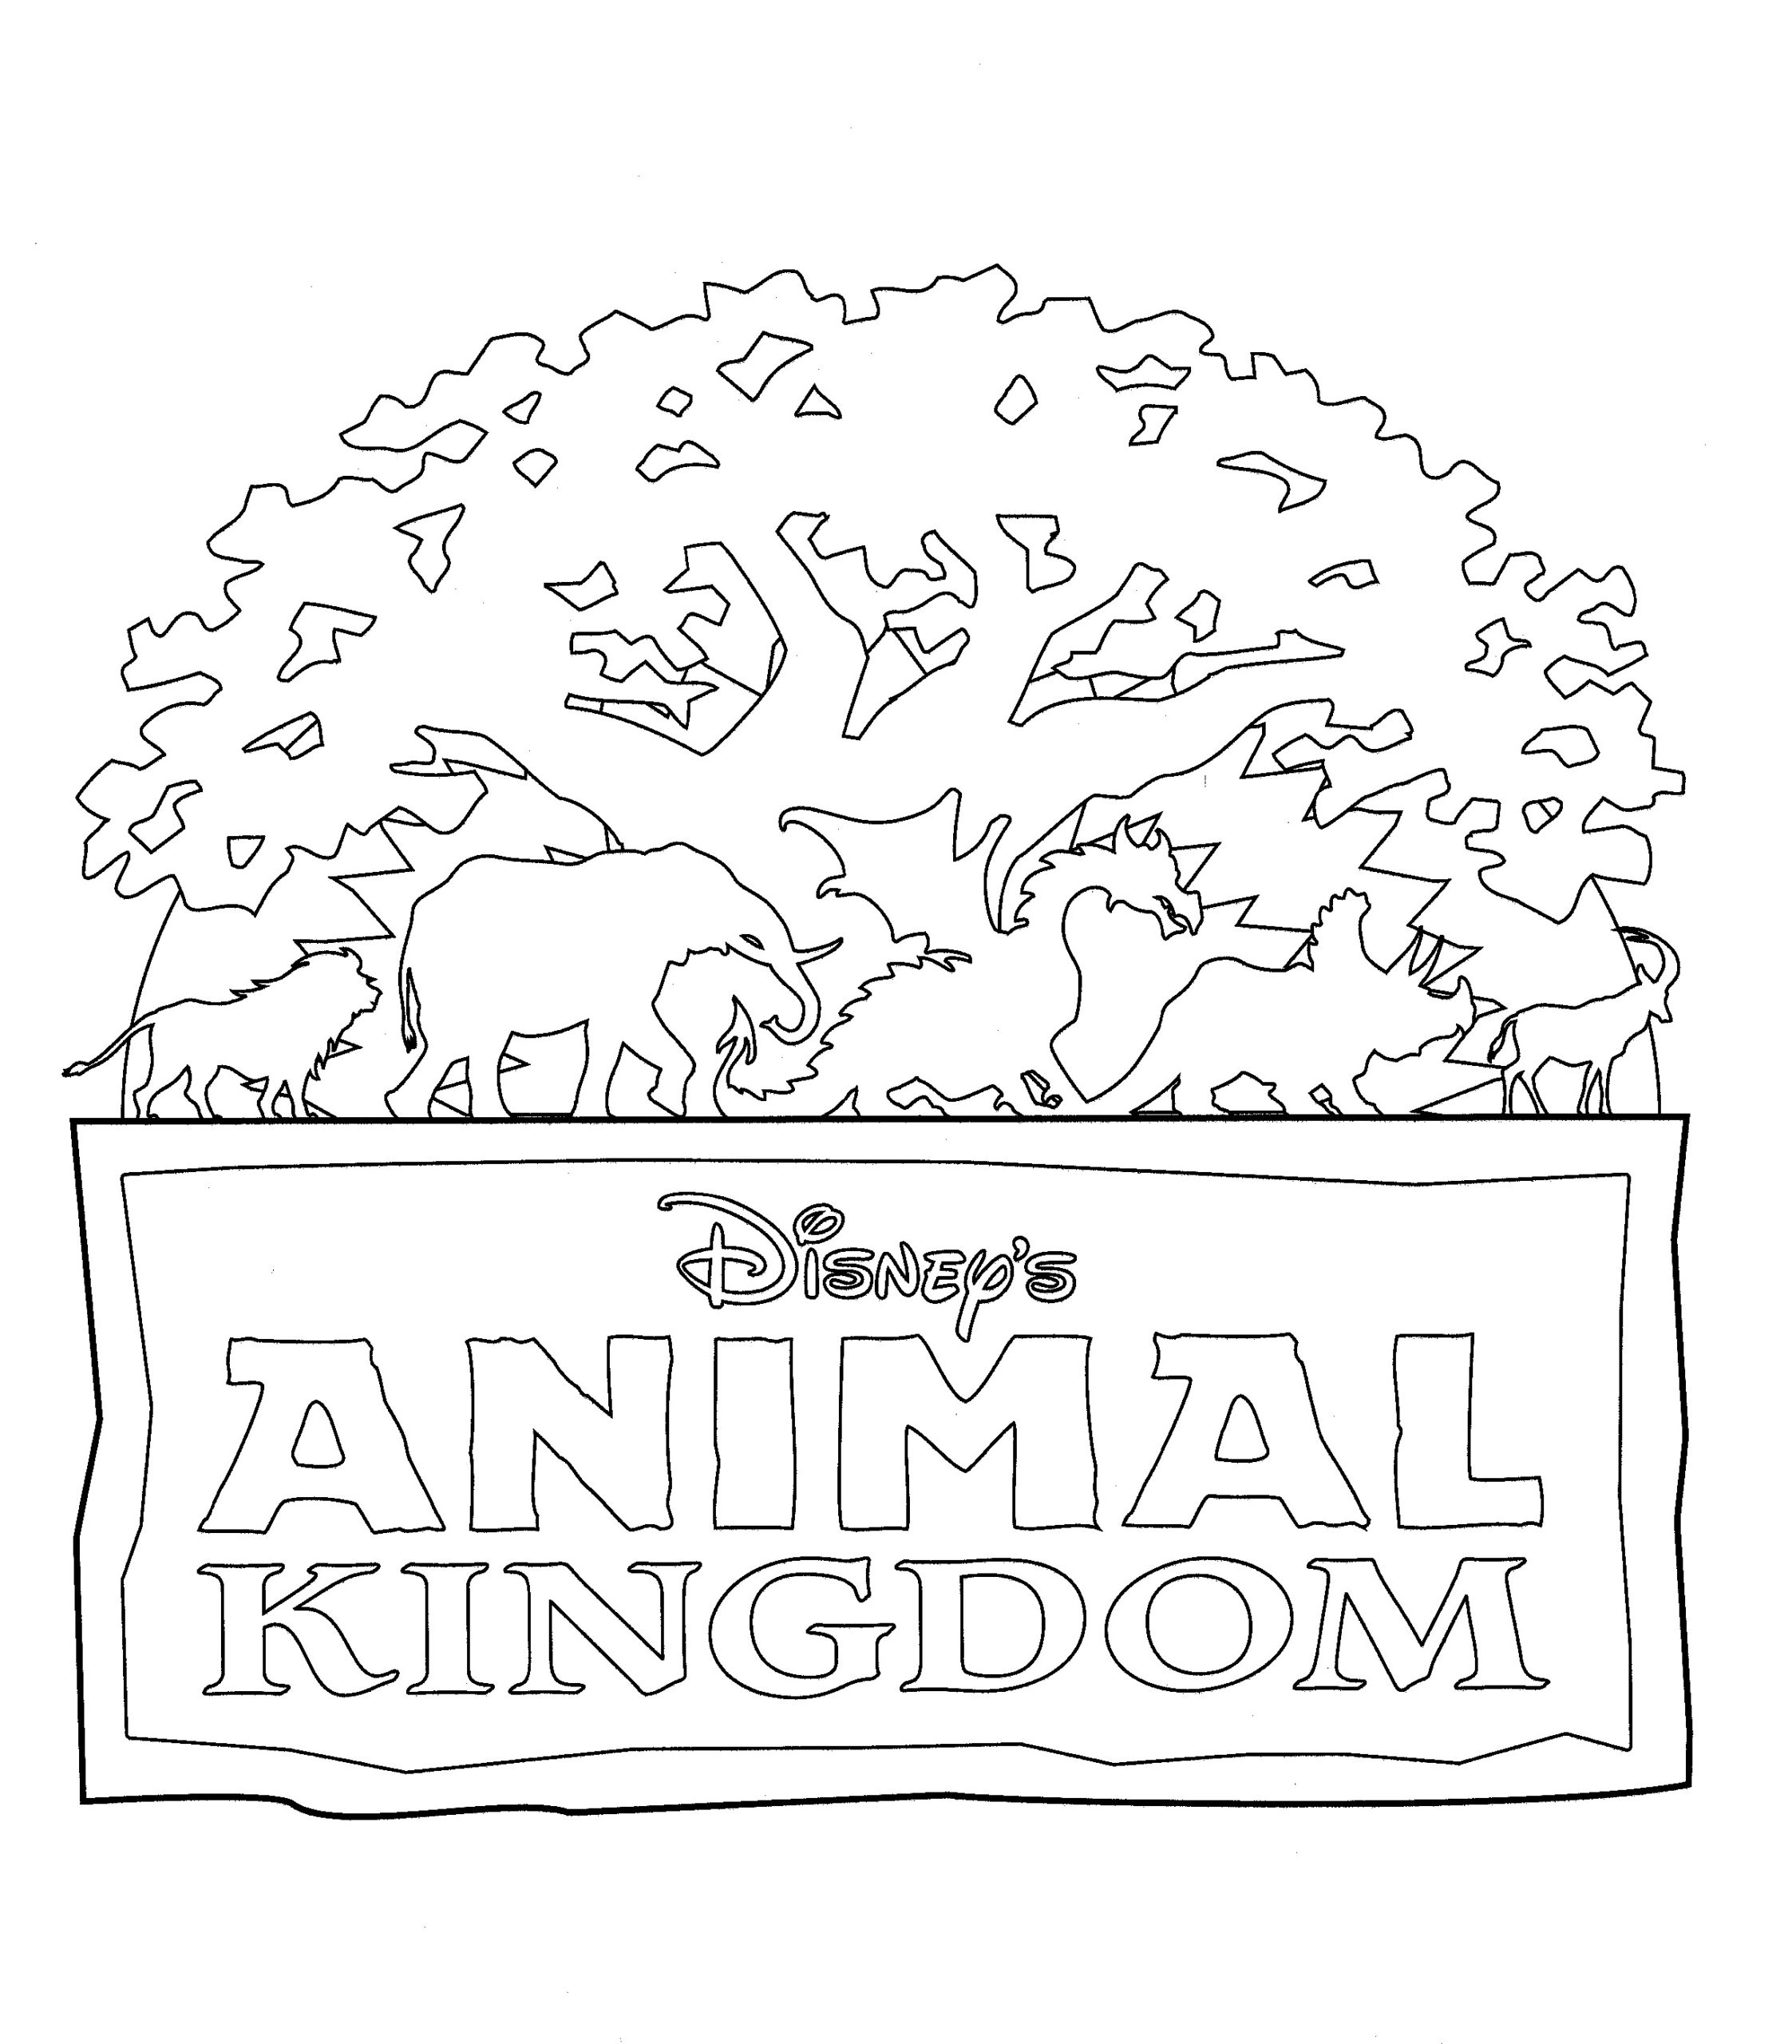 Disney Coloring Pages – Animal Kingdom Logo – The Disney Nerds Podcast